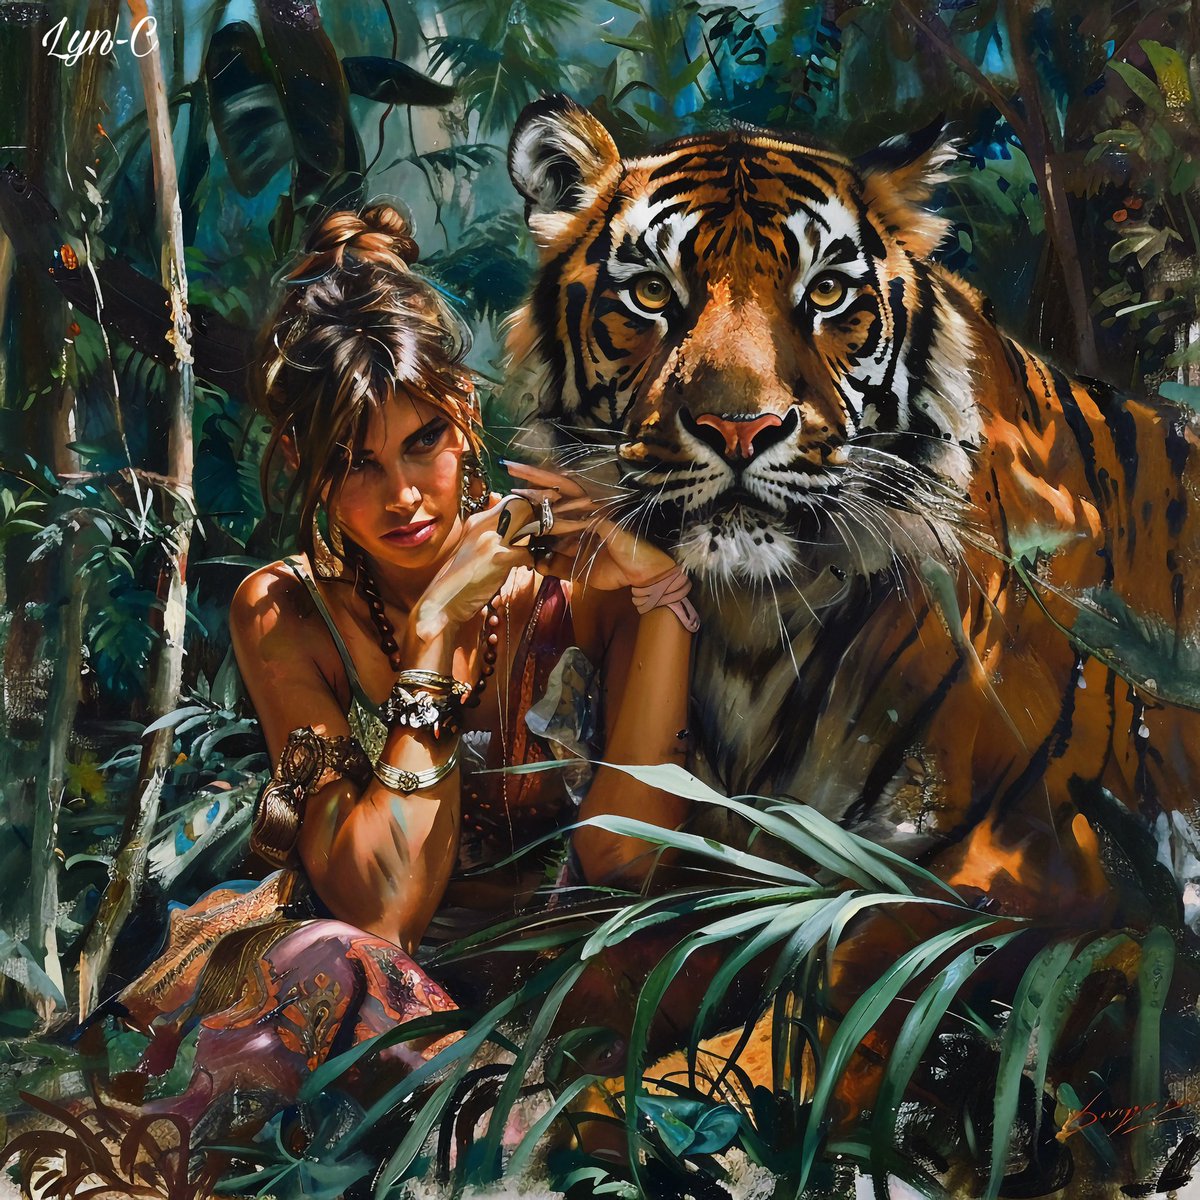 In the jungle's embrace, under canopy's gleam,
A wild-hearted maiden and a tiger, a dream.
Side by side in silent pact, nature's grace they bear,
In a world untamed, a duo rare.

Image by Lyn-C

#JungleWhisper #WildAndFree #NatureBond #TigerCompanion #ArtisticHarmony #Numerikart